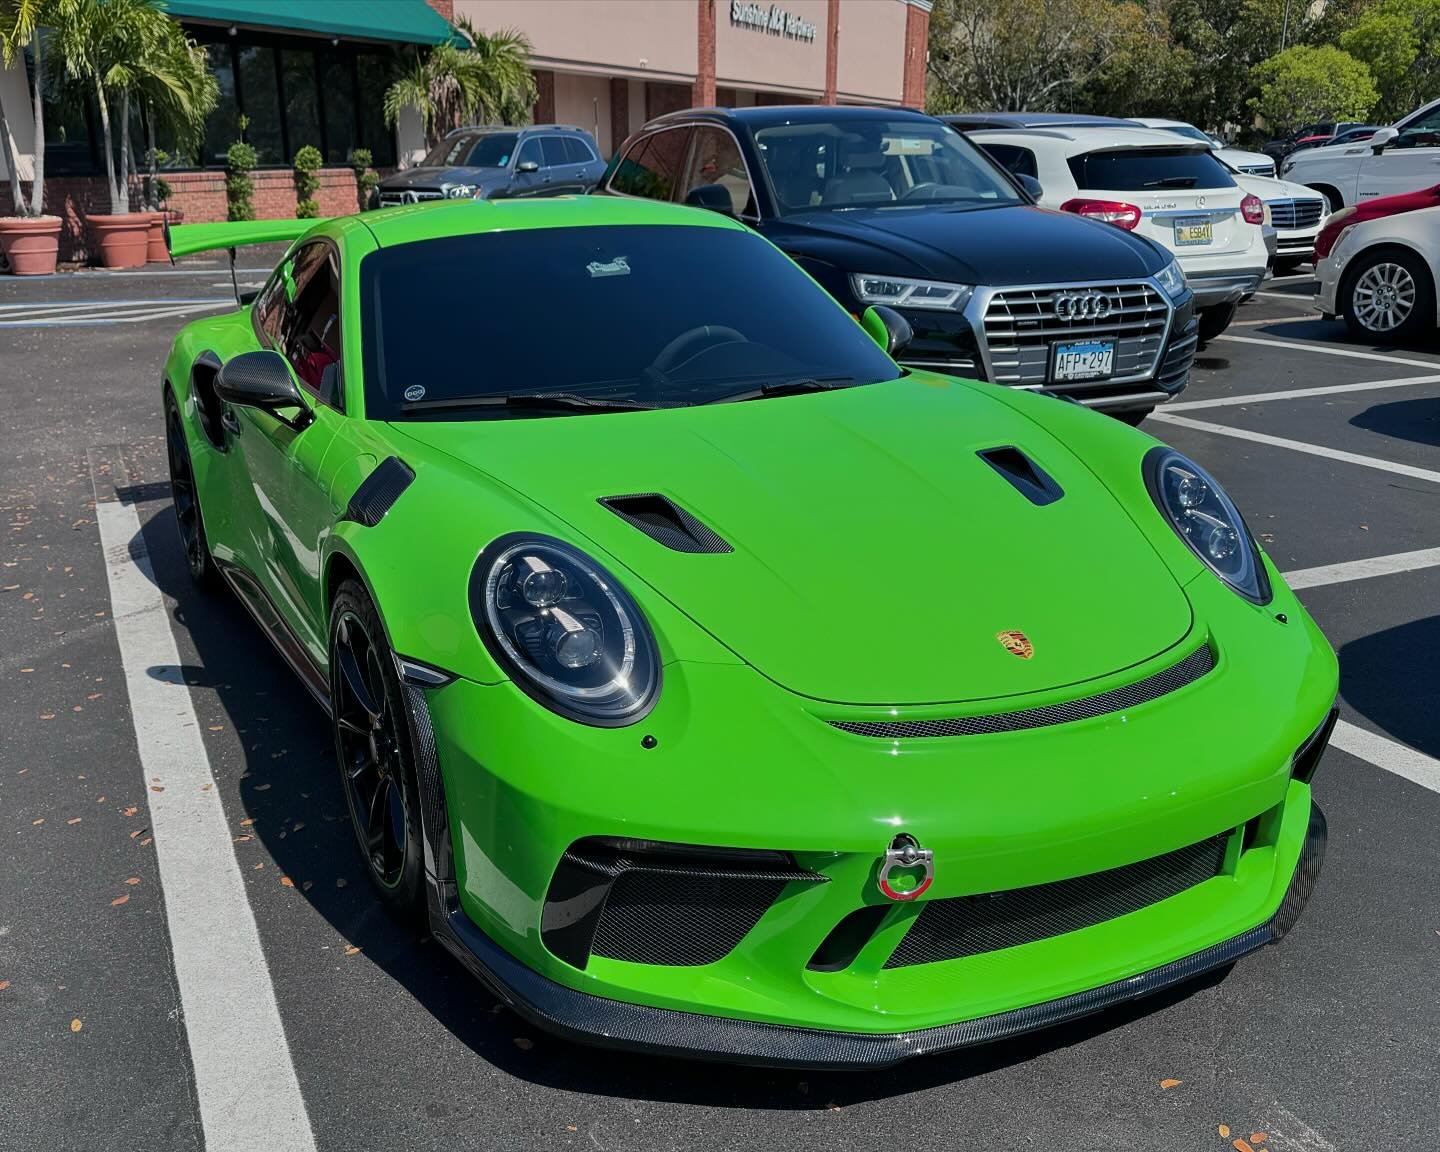 when you&rsquo;re in a hurry to get groceries
#porsche #gt3rs